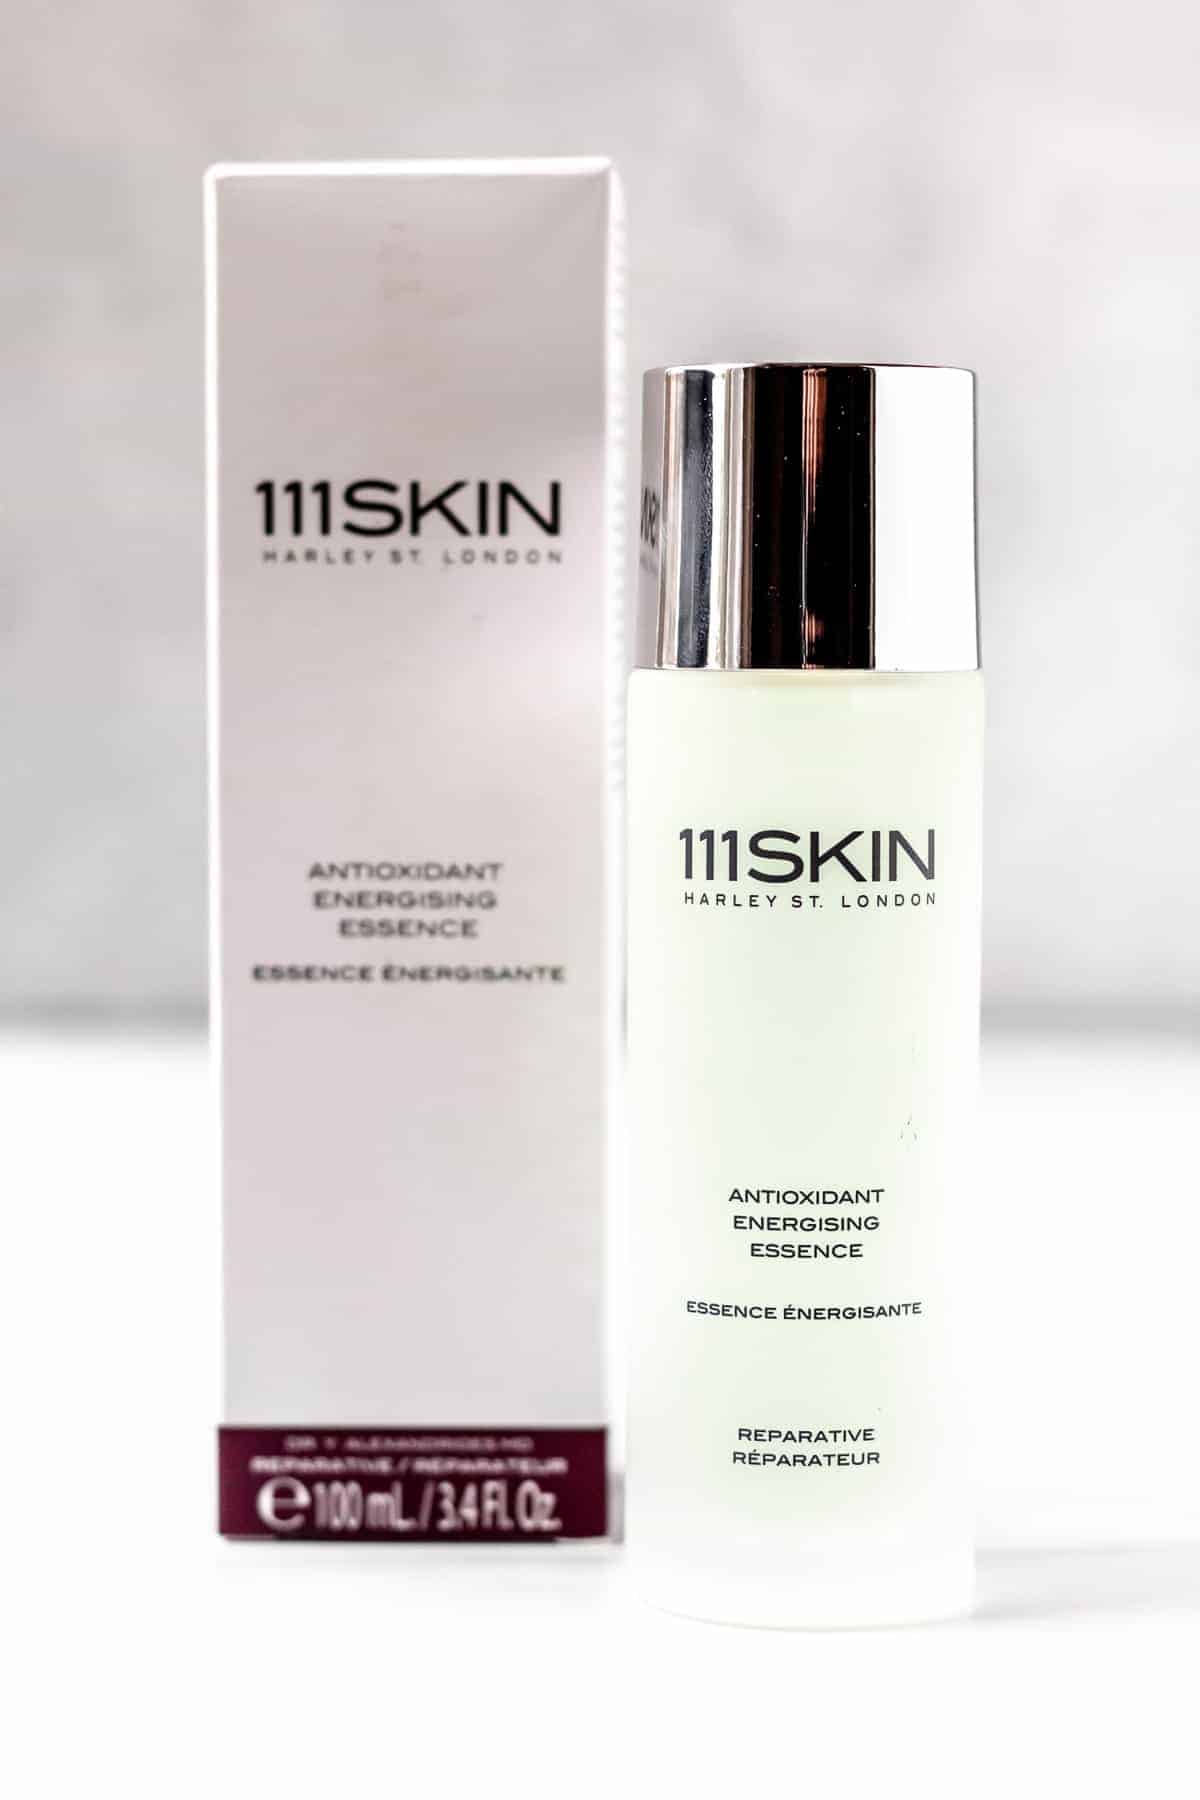 111Skin Antioxidant Energising Essence bottle and box on a white and gray background.